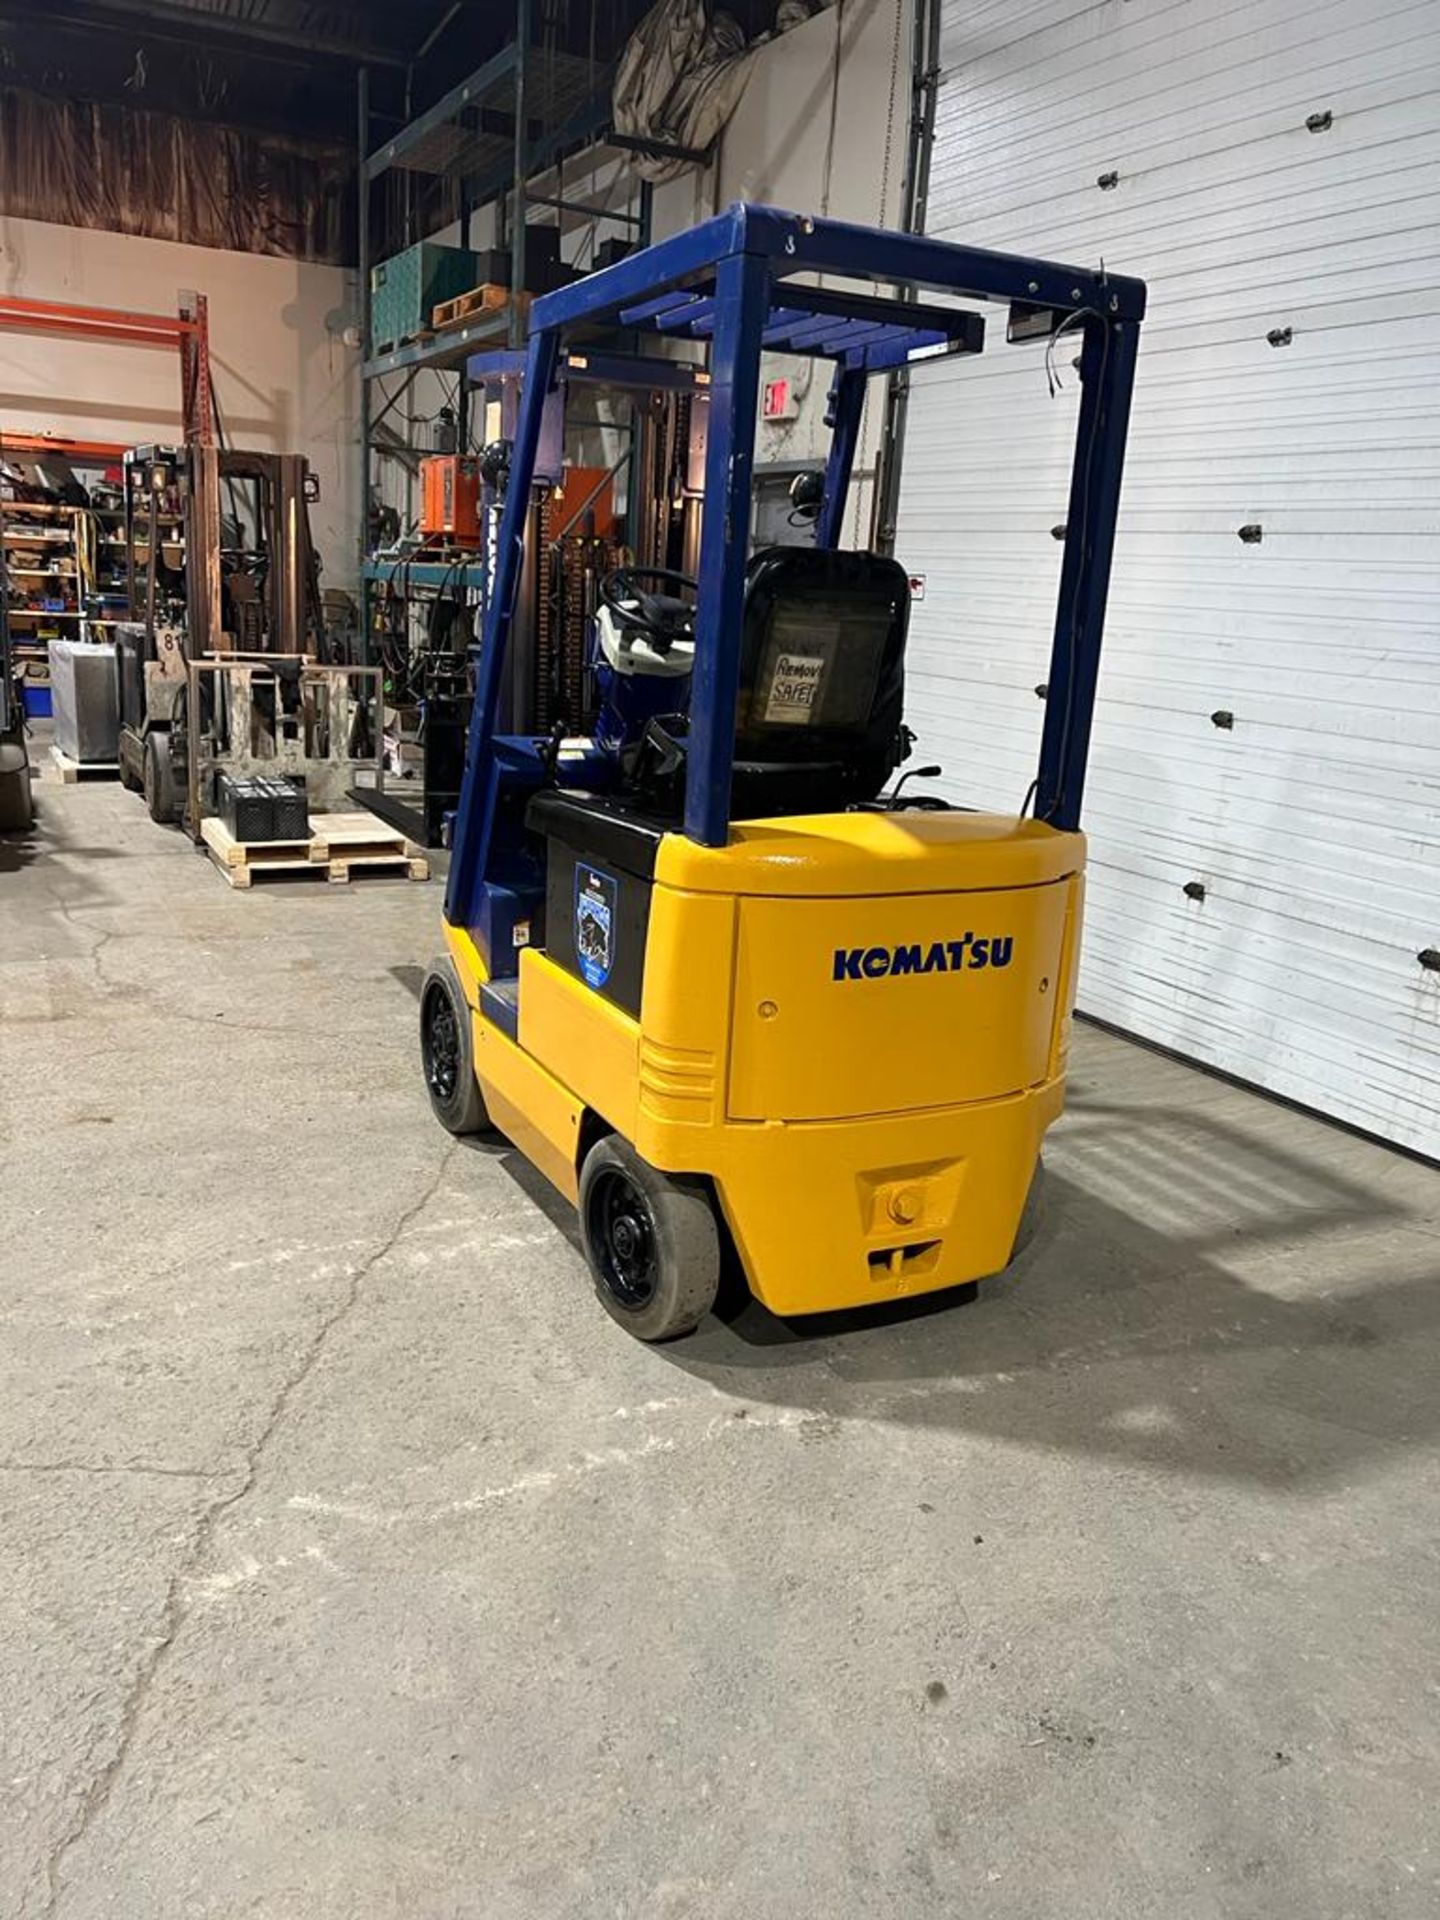 NICE Komatsu 4,000lbs Capacity Forklift with 3-stage mast Electric 36V with LOW HOURS - FREE - Image 2 of 3